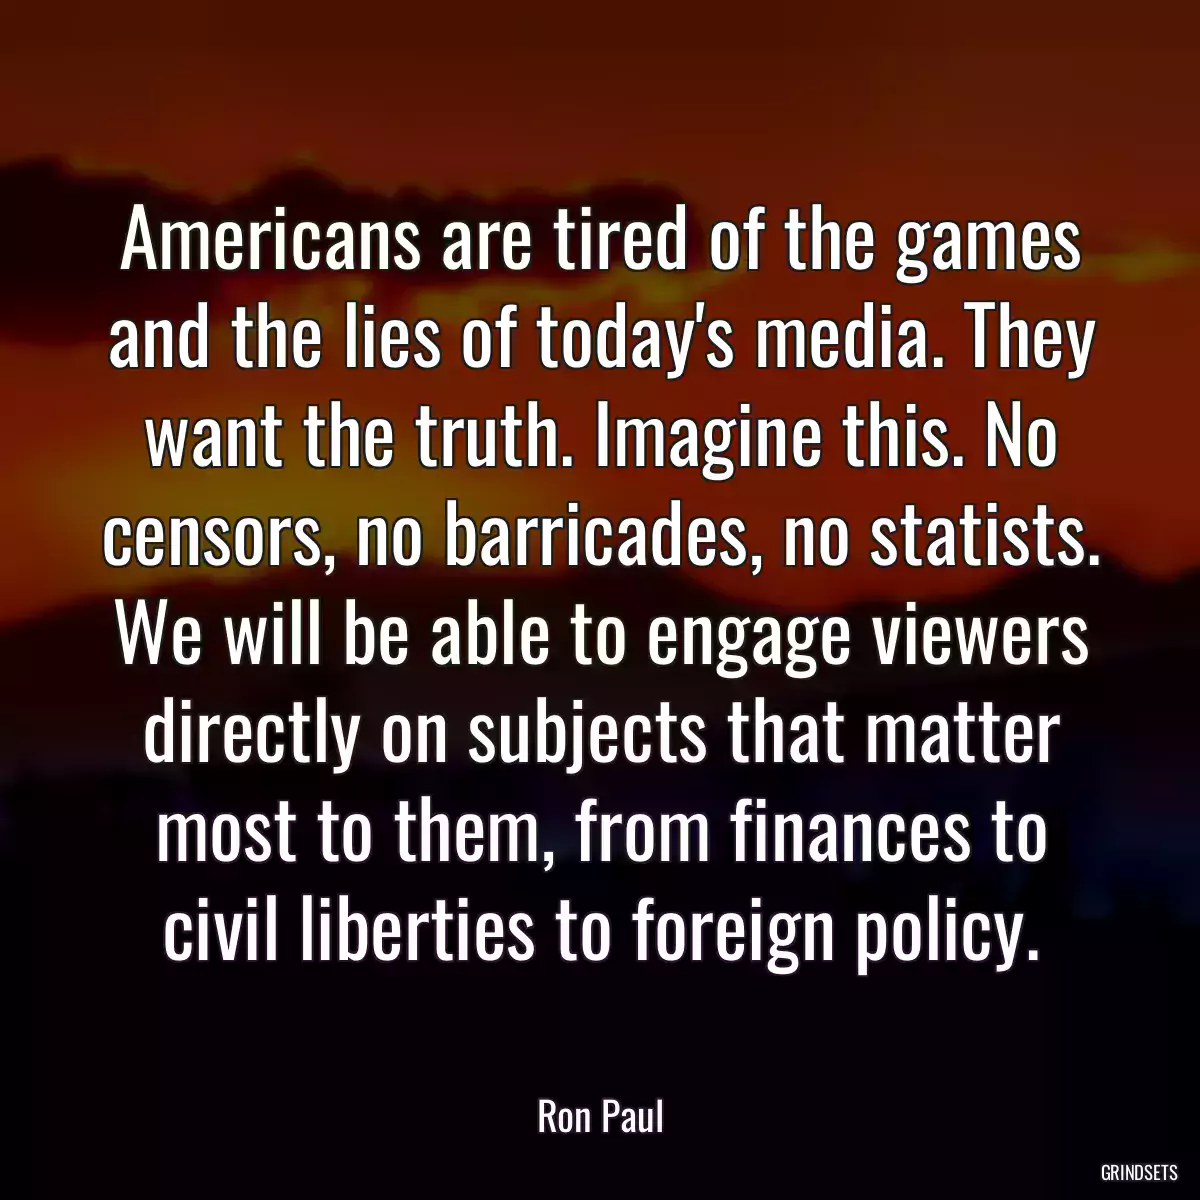 Americans are tired of the games and the lies of today\'s media. They want the truth. Imagine this. No censors, no barricades, no statists. We will be able to engage viewers directly on subjects that matter most to them, from finances to civil liberties to foreign policy.